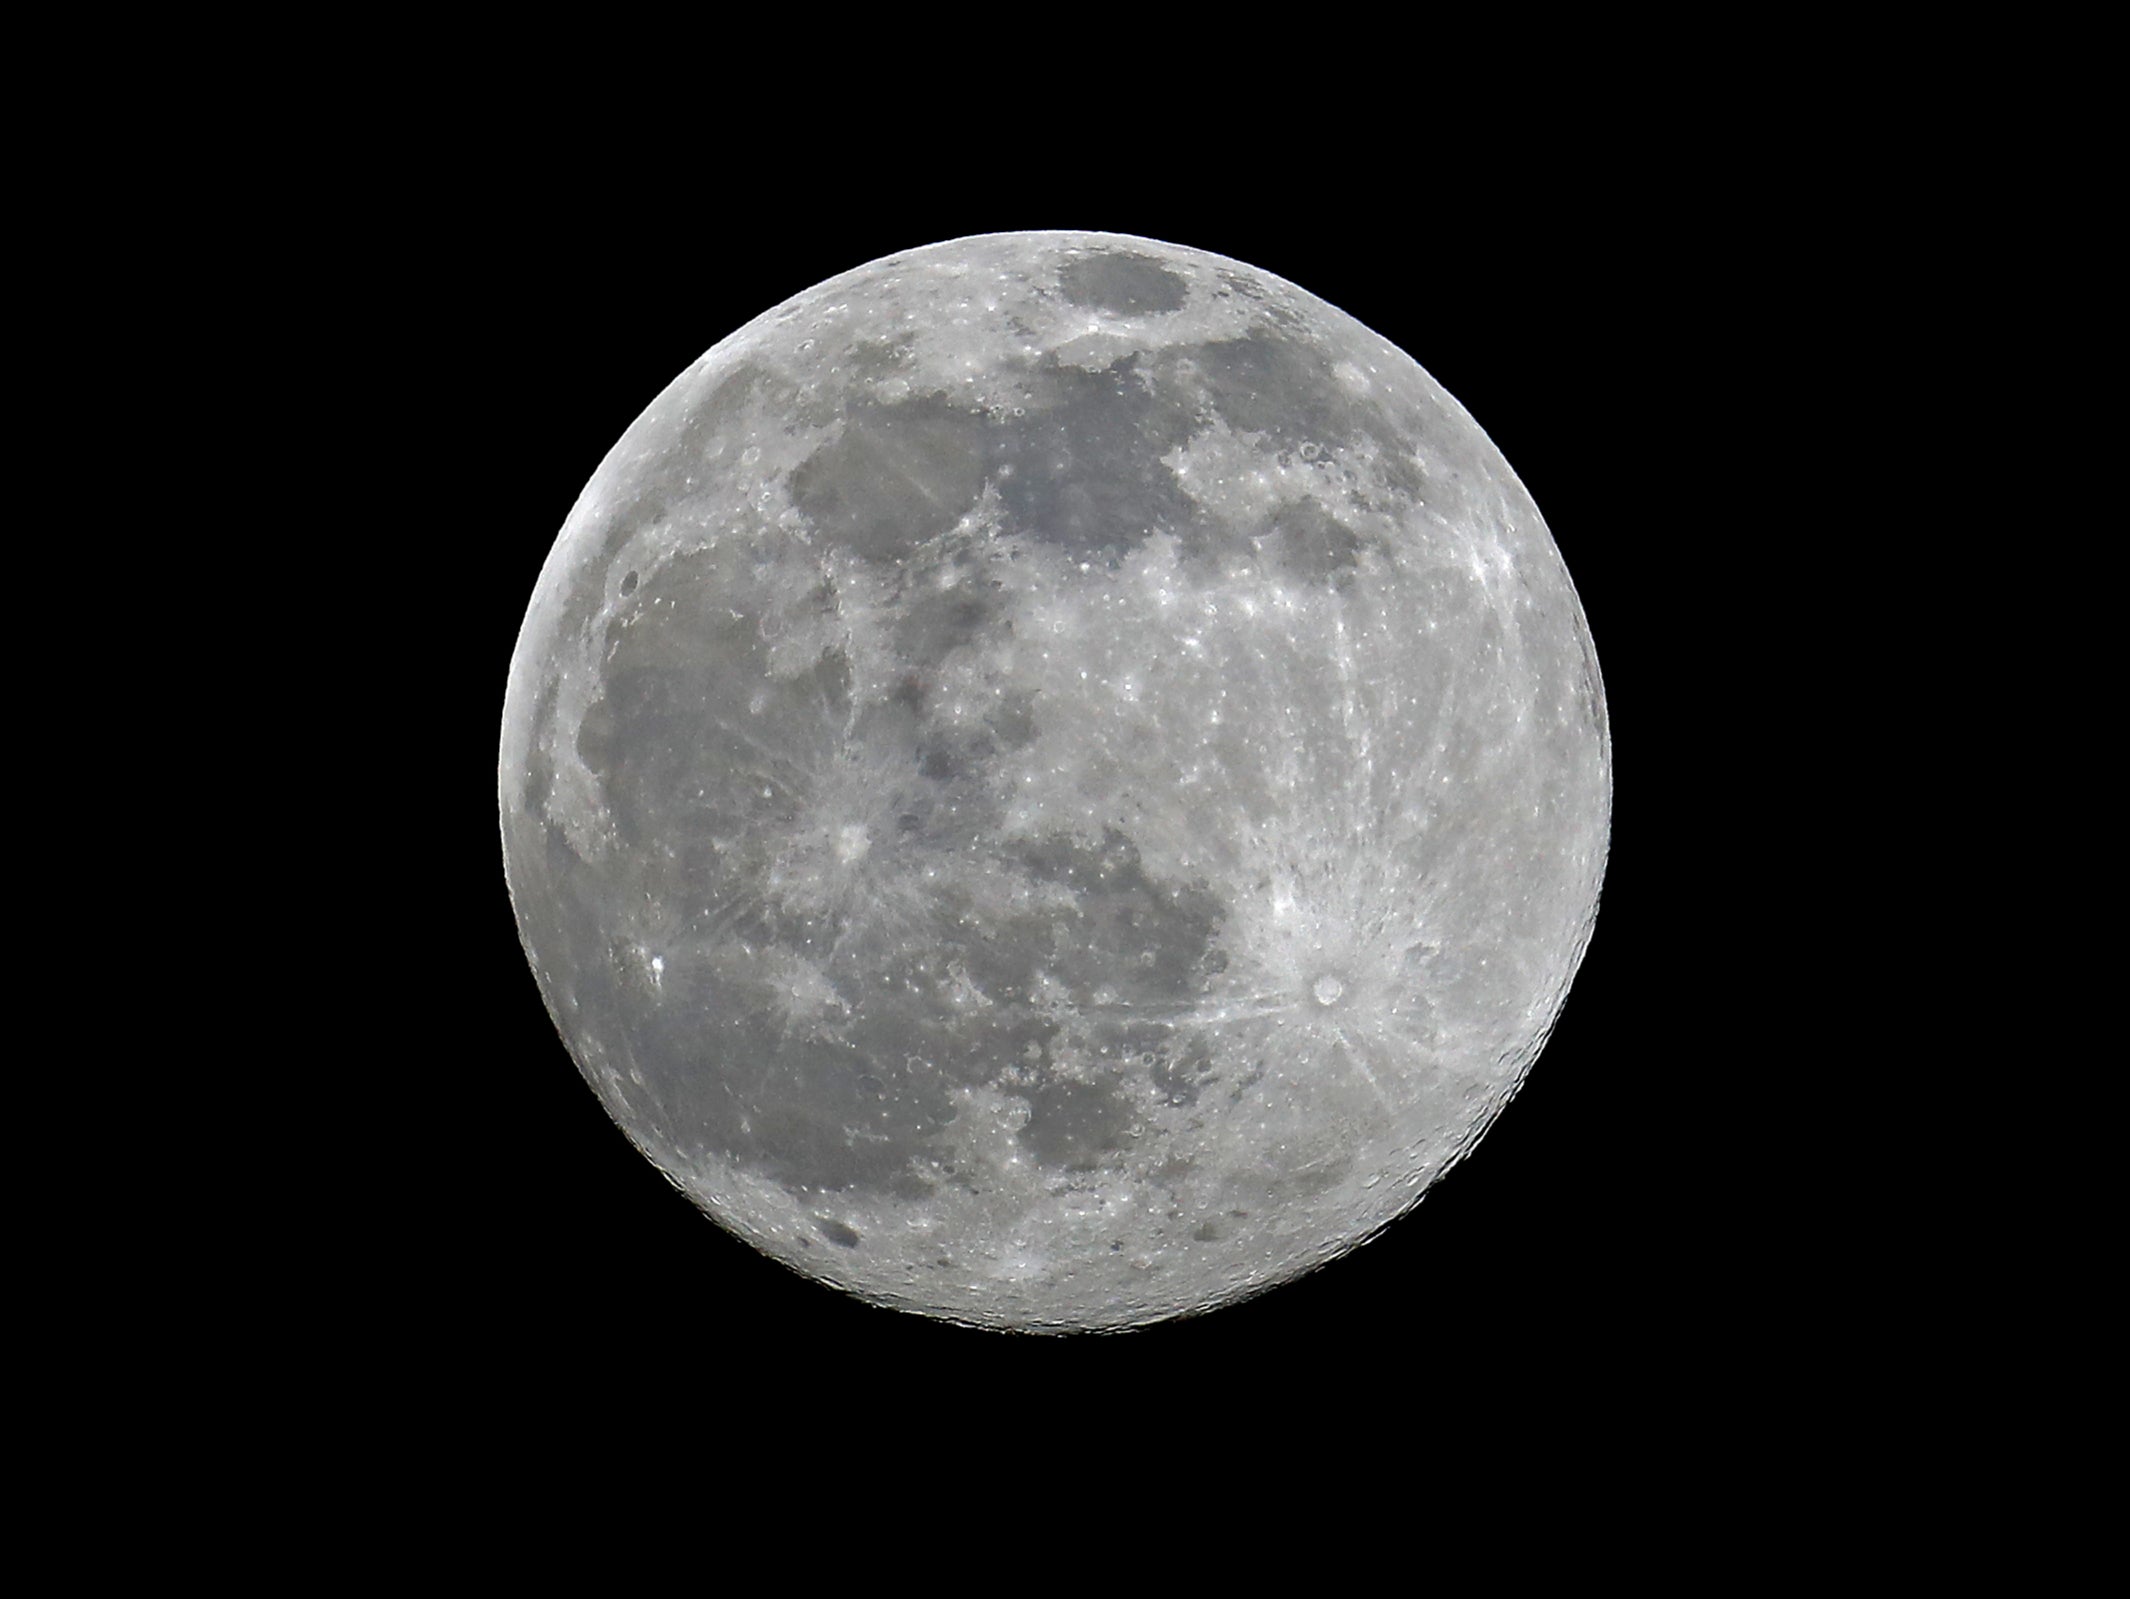 The full moon in the night sky over London on 26 February